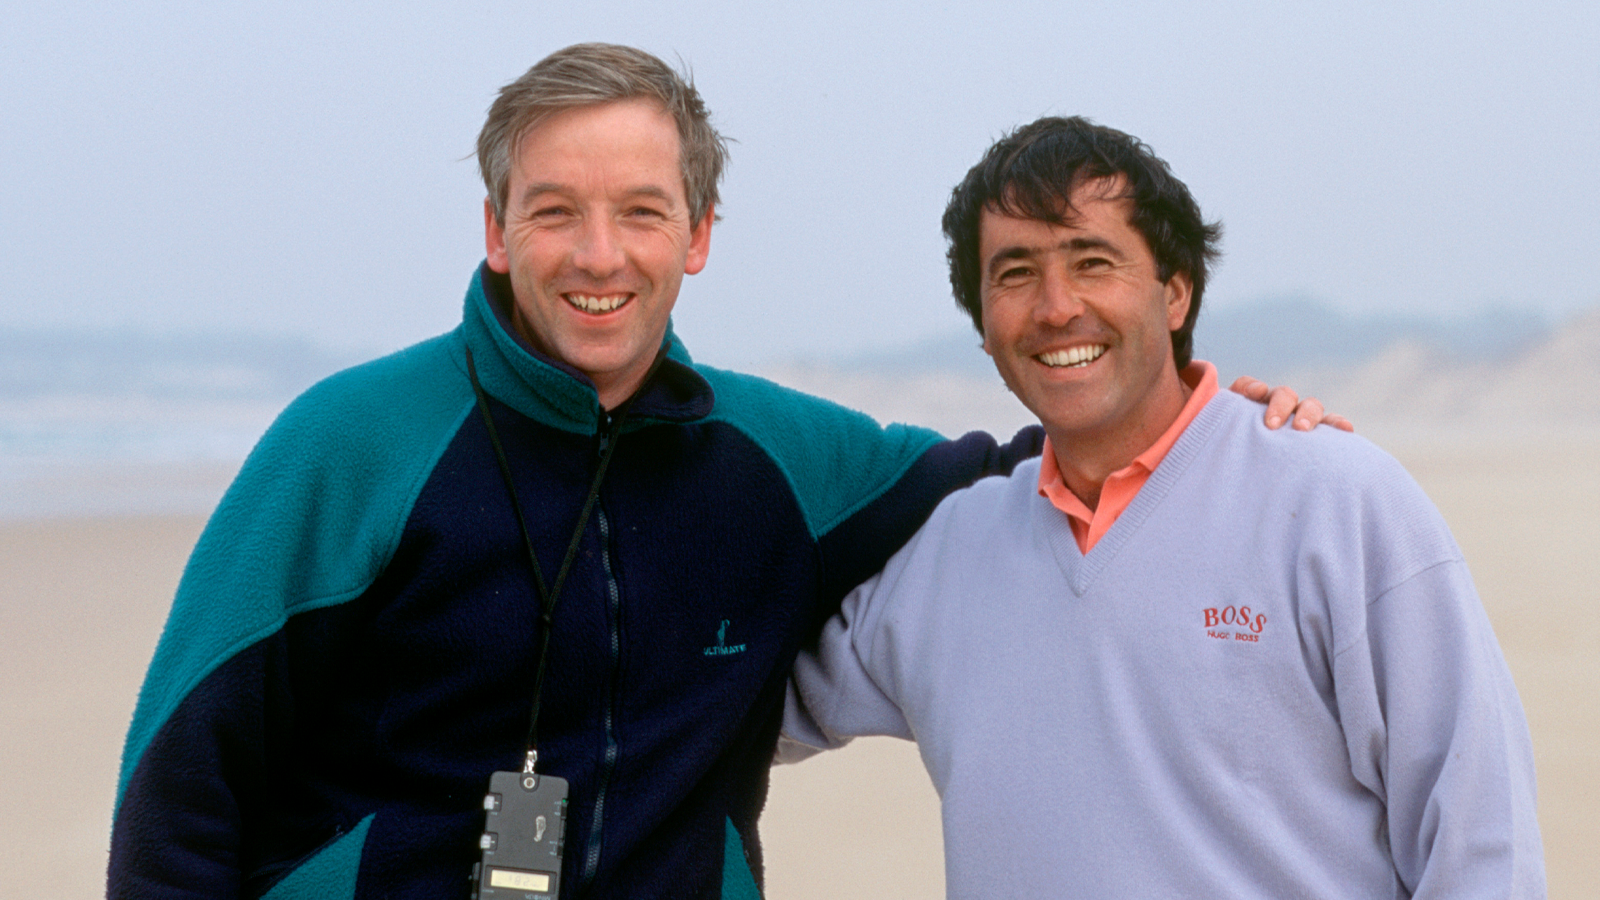 David Cannon and Seve Ballesteros in 1992.